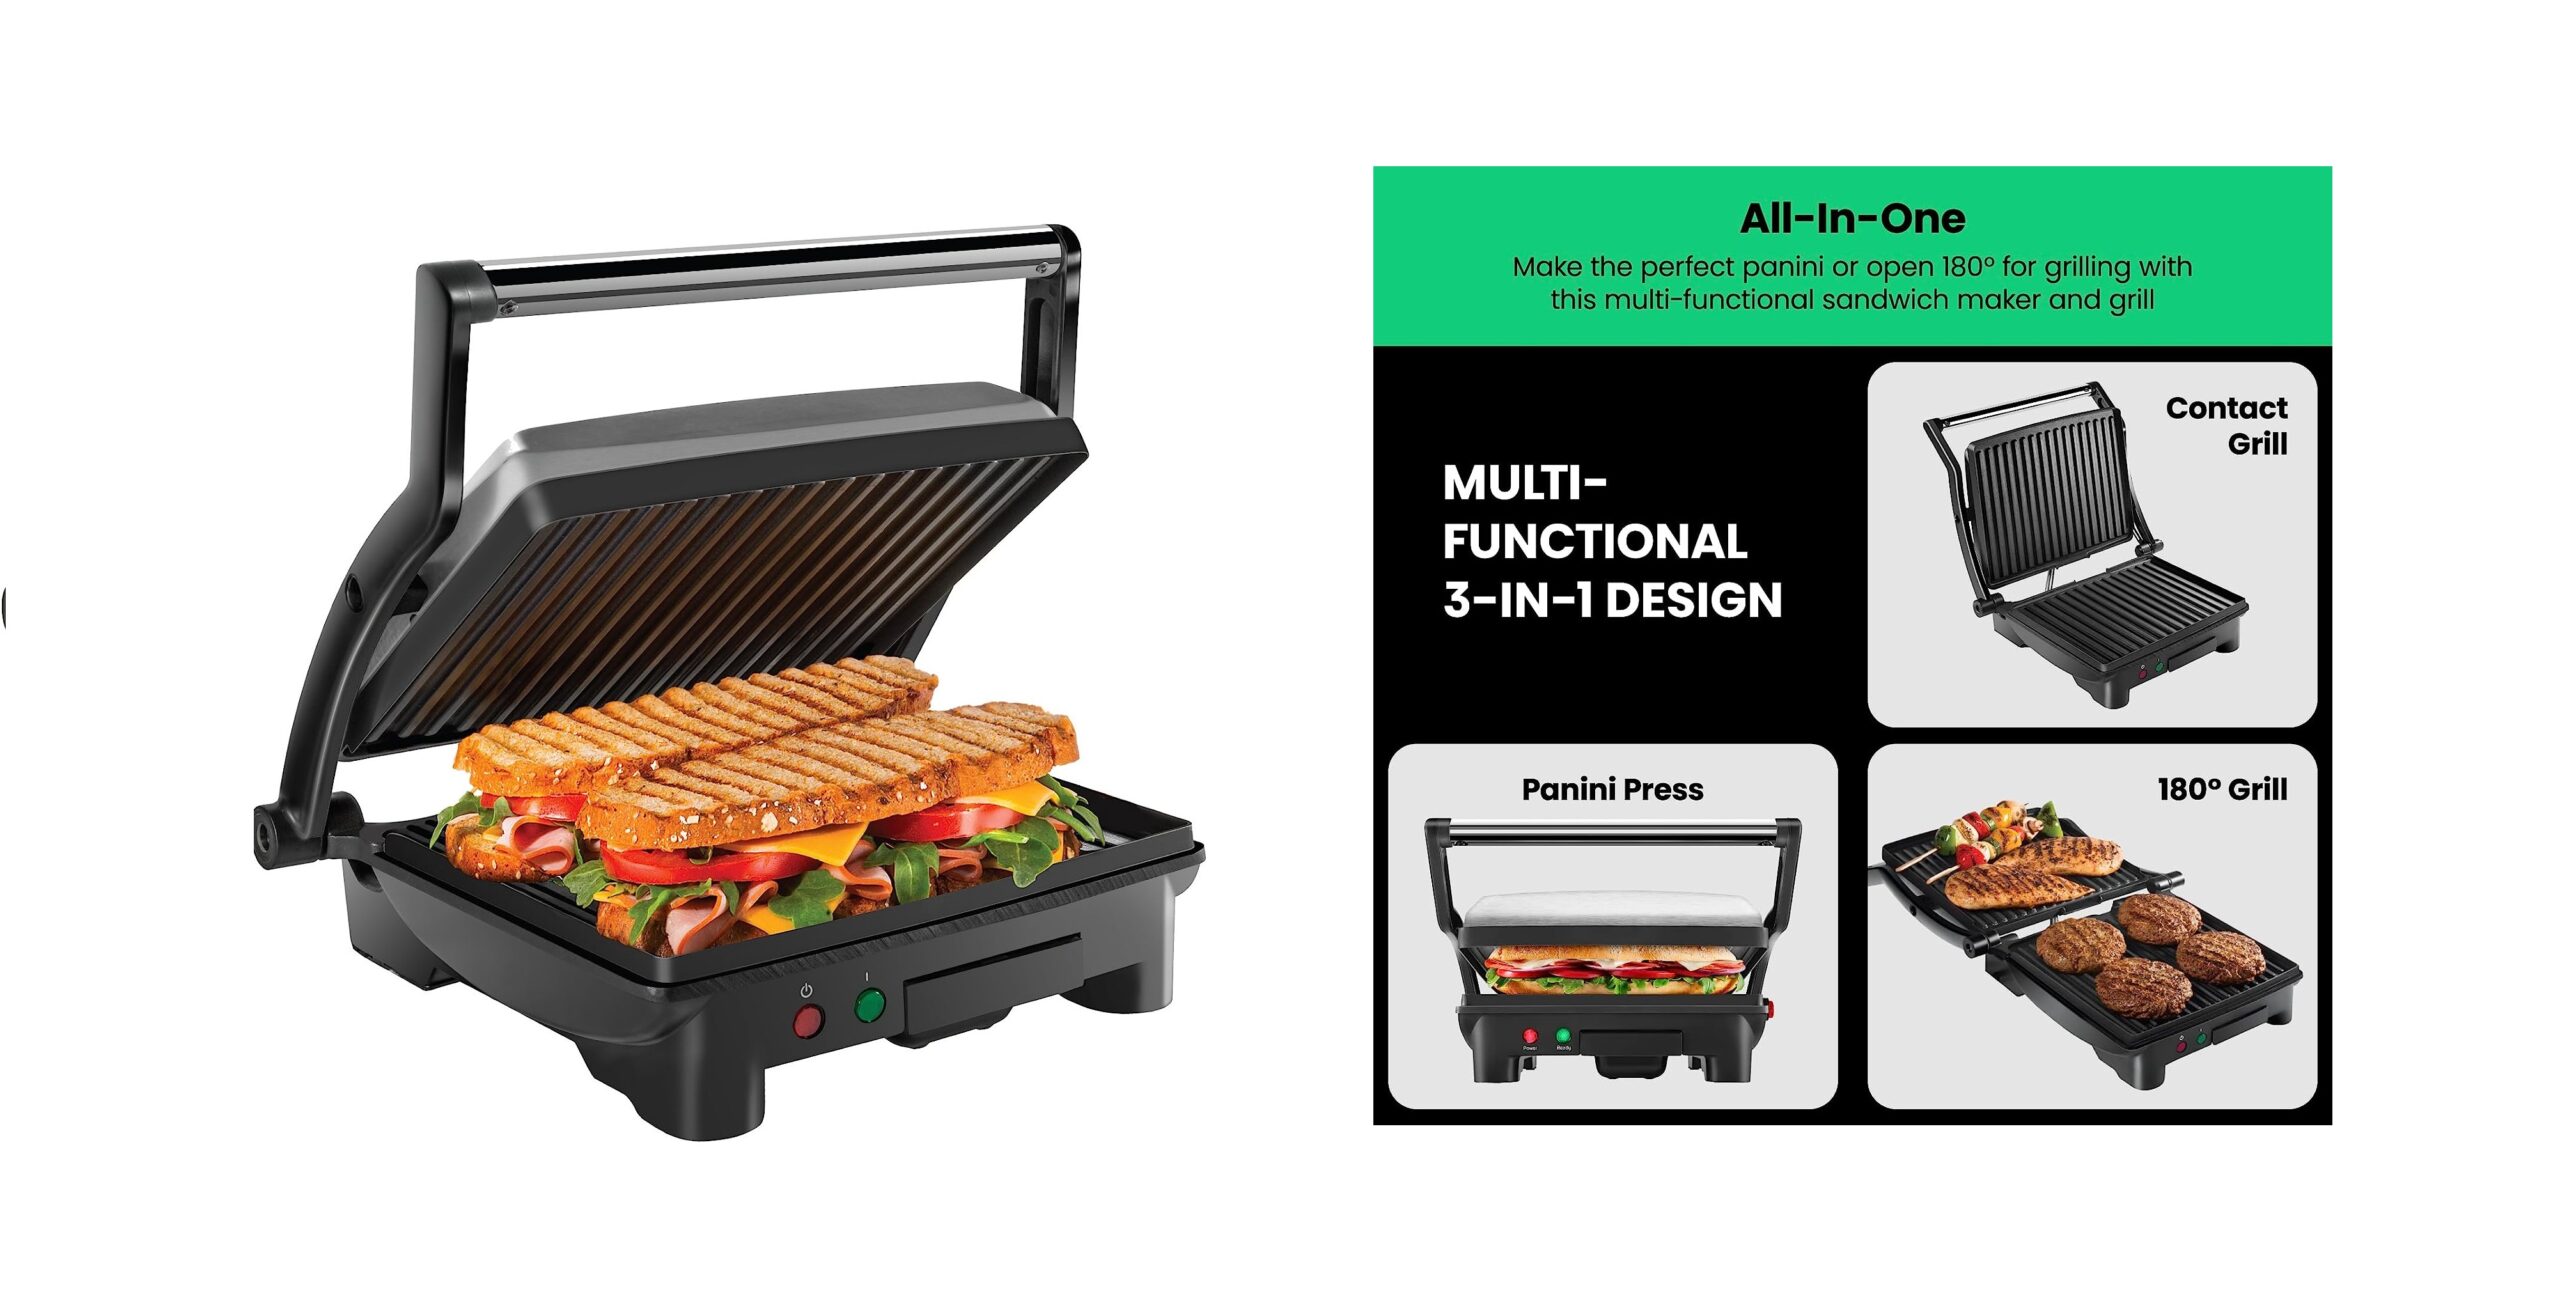 Chefman Panini Press Grill and Gourmet Sandwich Maker - One of The Top Christmas Gift Ideas for Moms in 2023